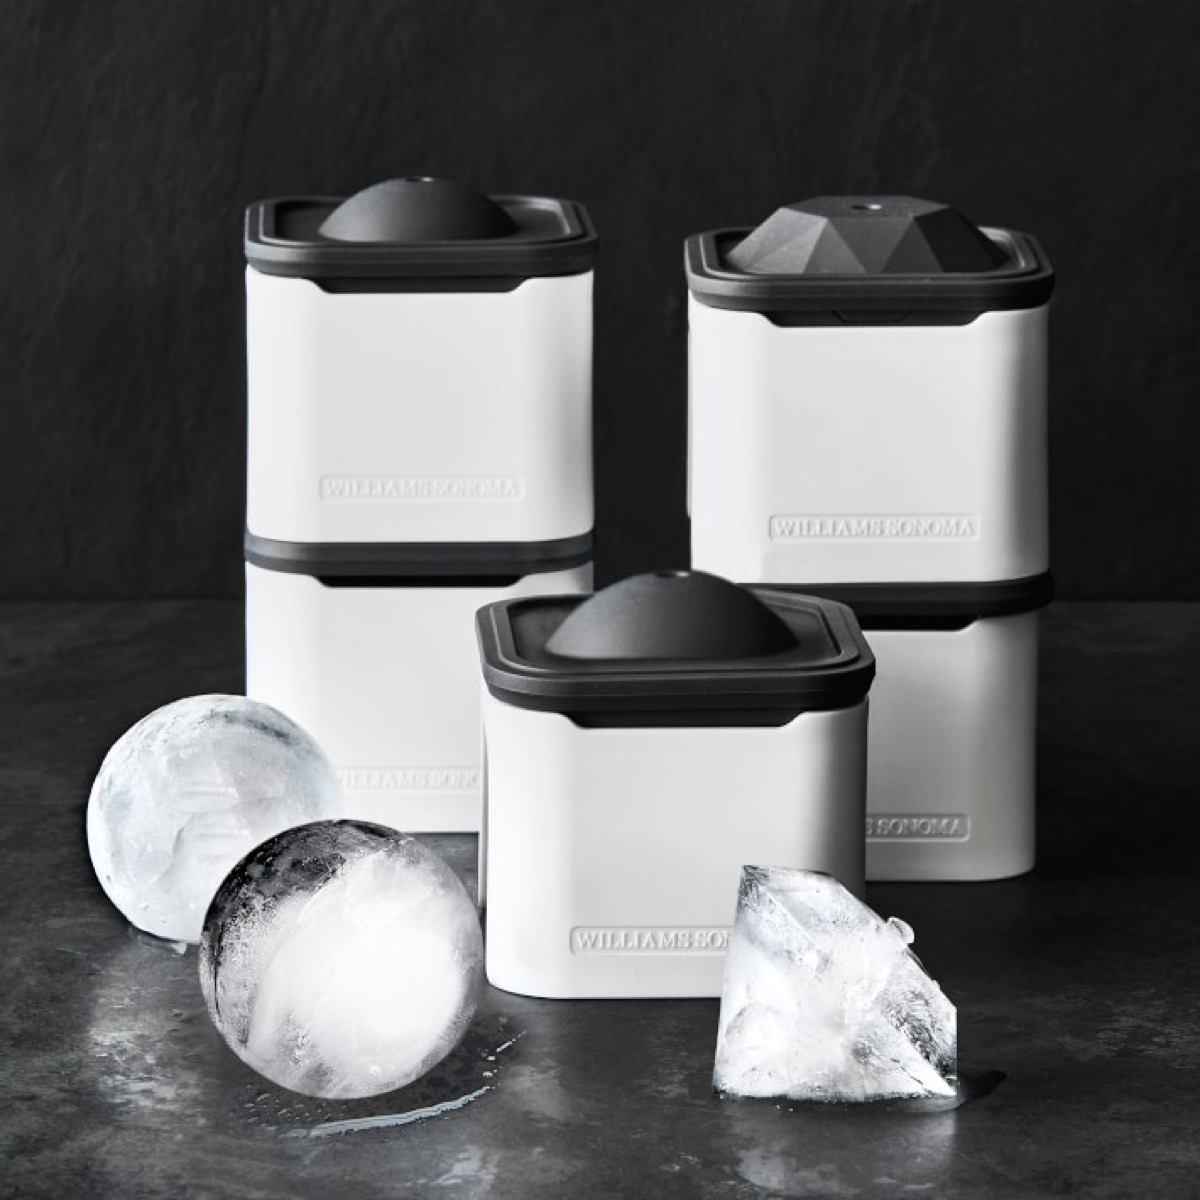 Diamond and sphere shaped ice molds